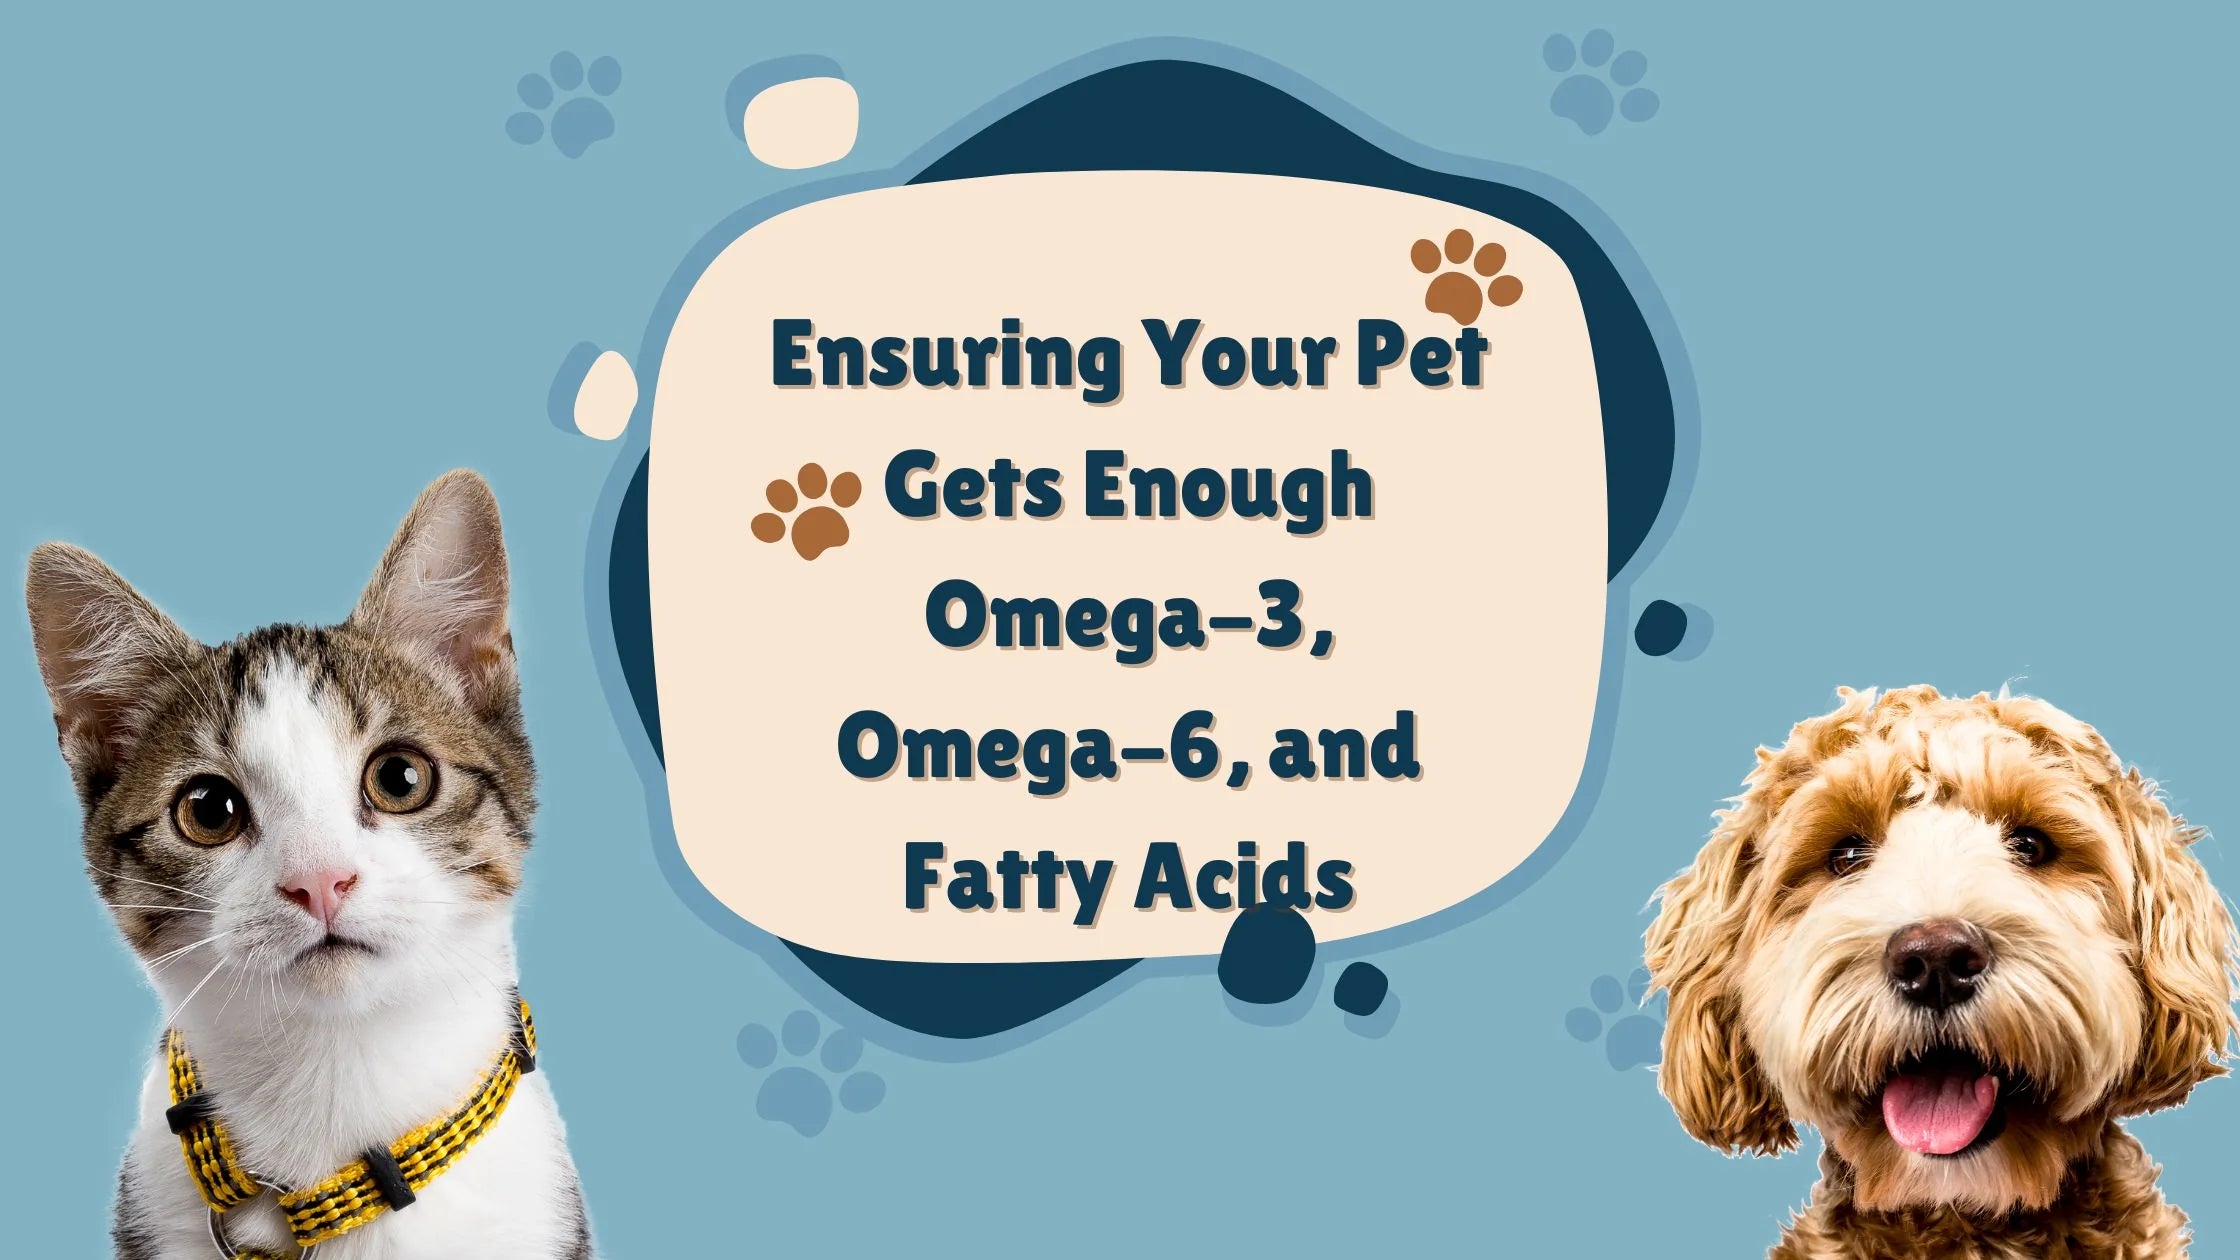 Ensuring Your Pet Gets Enough Omega-3, Omega-6, and Fatty Acids - Goofy Tails